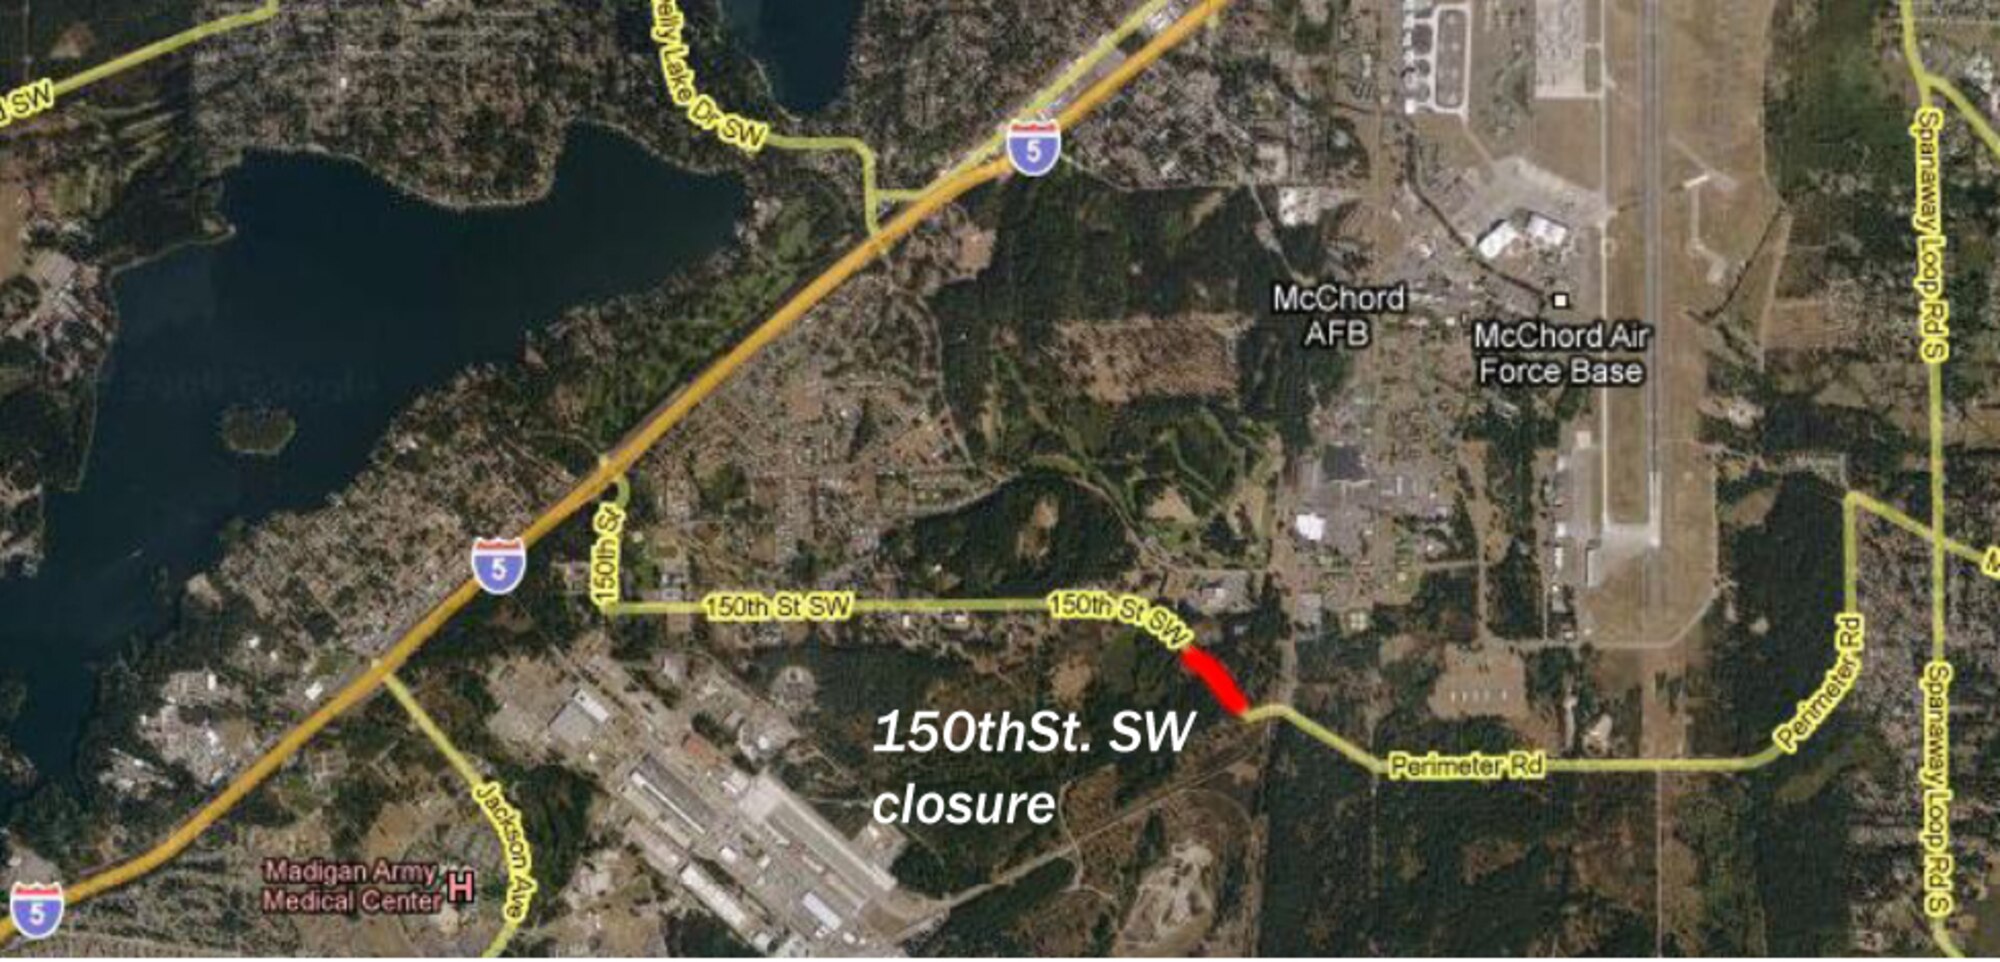 Fort Lewis officials will close a 900-foot section of 150th St. SW from Nov. 2 - 21 for repair and resurfacing. 